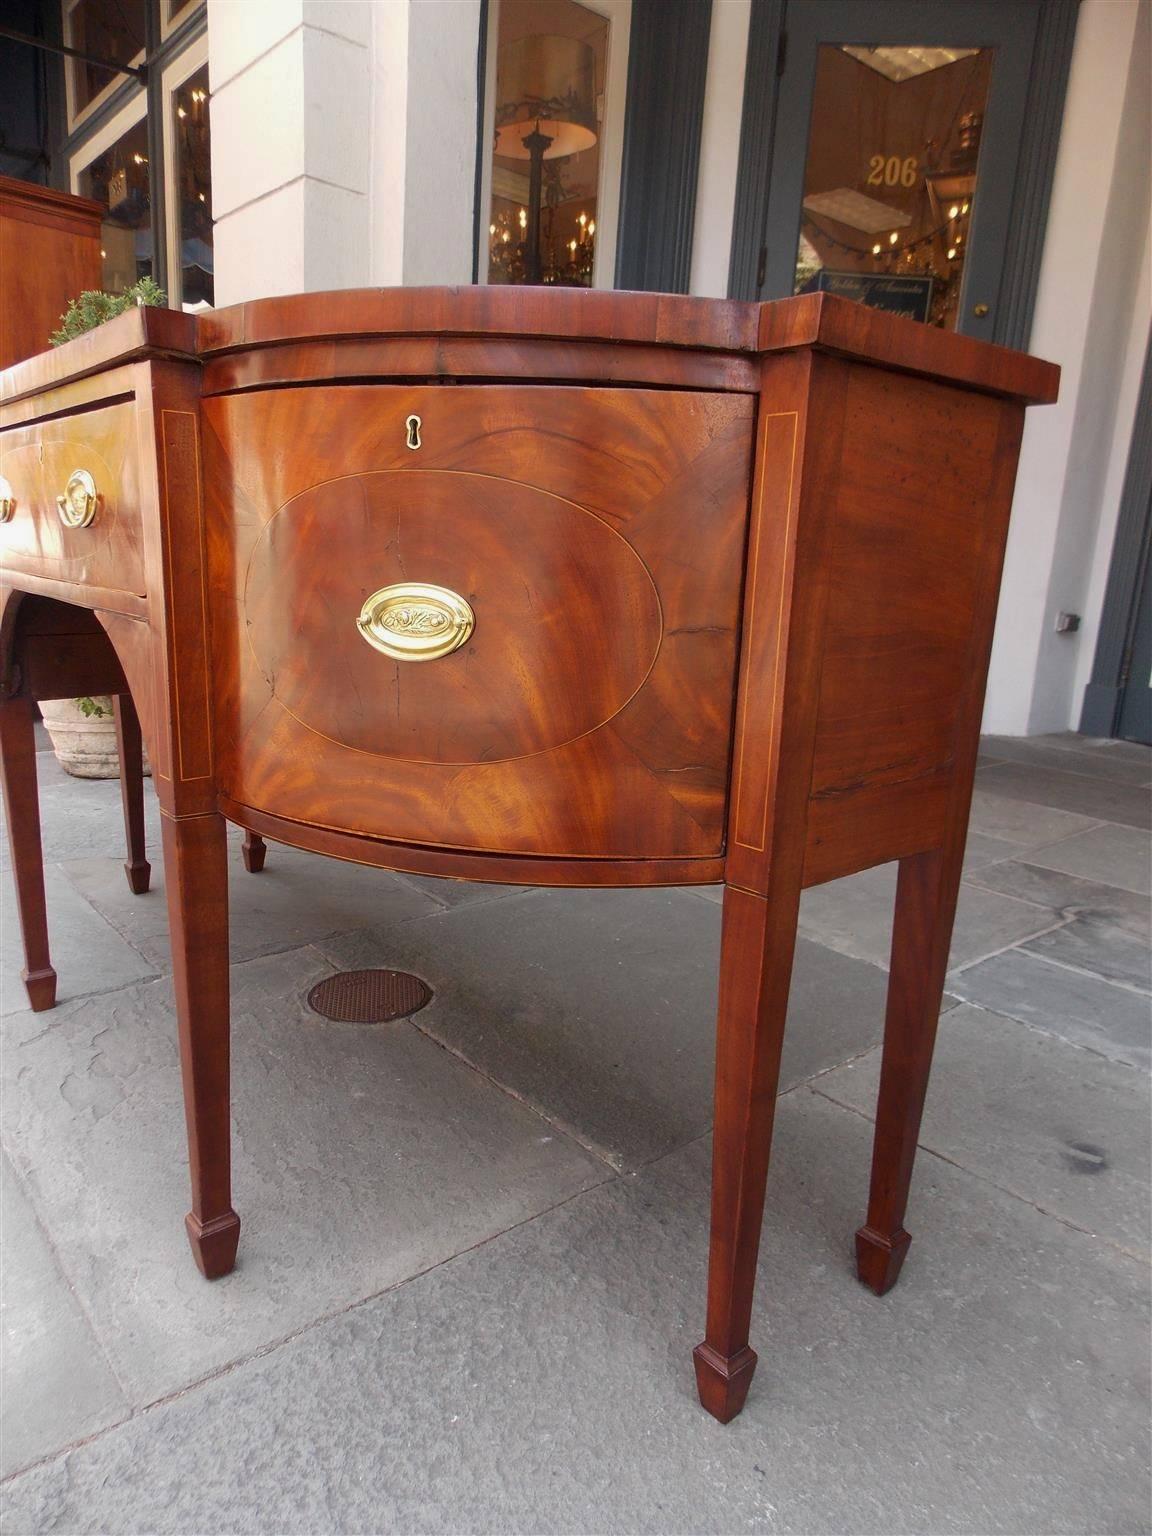 English Hepplewhite Bow Front Mahogany Satinwood Inlaid Sideboard, Circa 1780 In Excellent Condition For Sale In Hollywood, SC